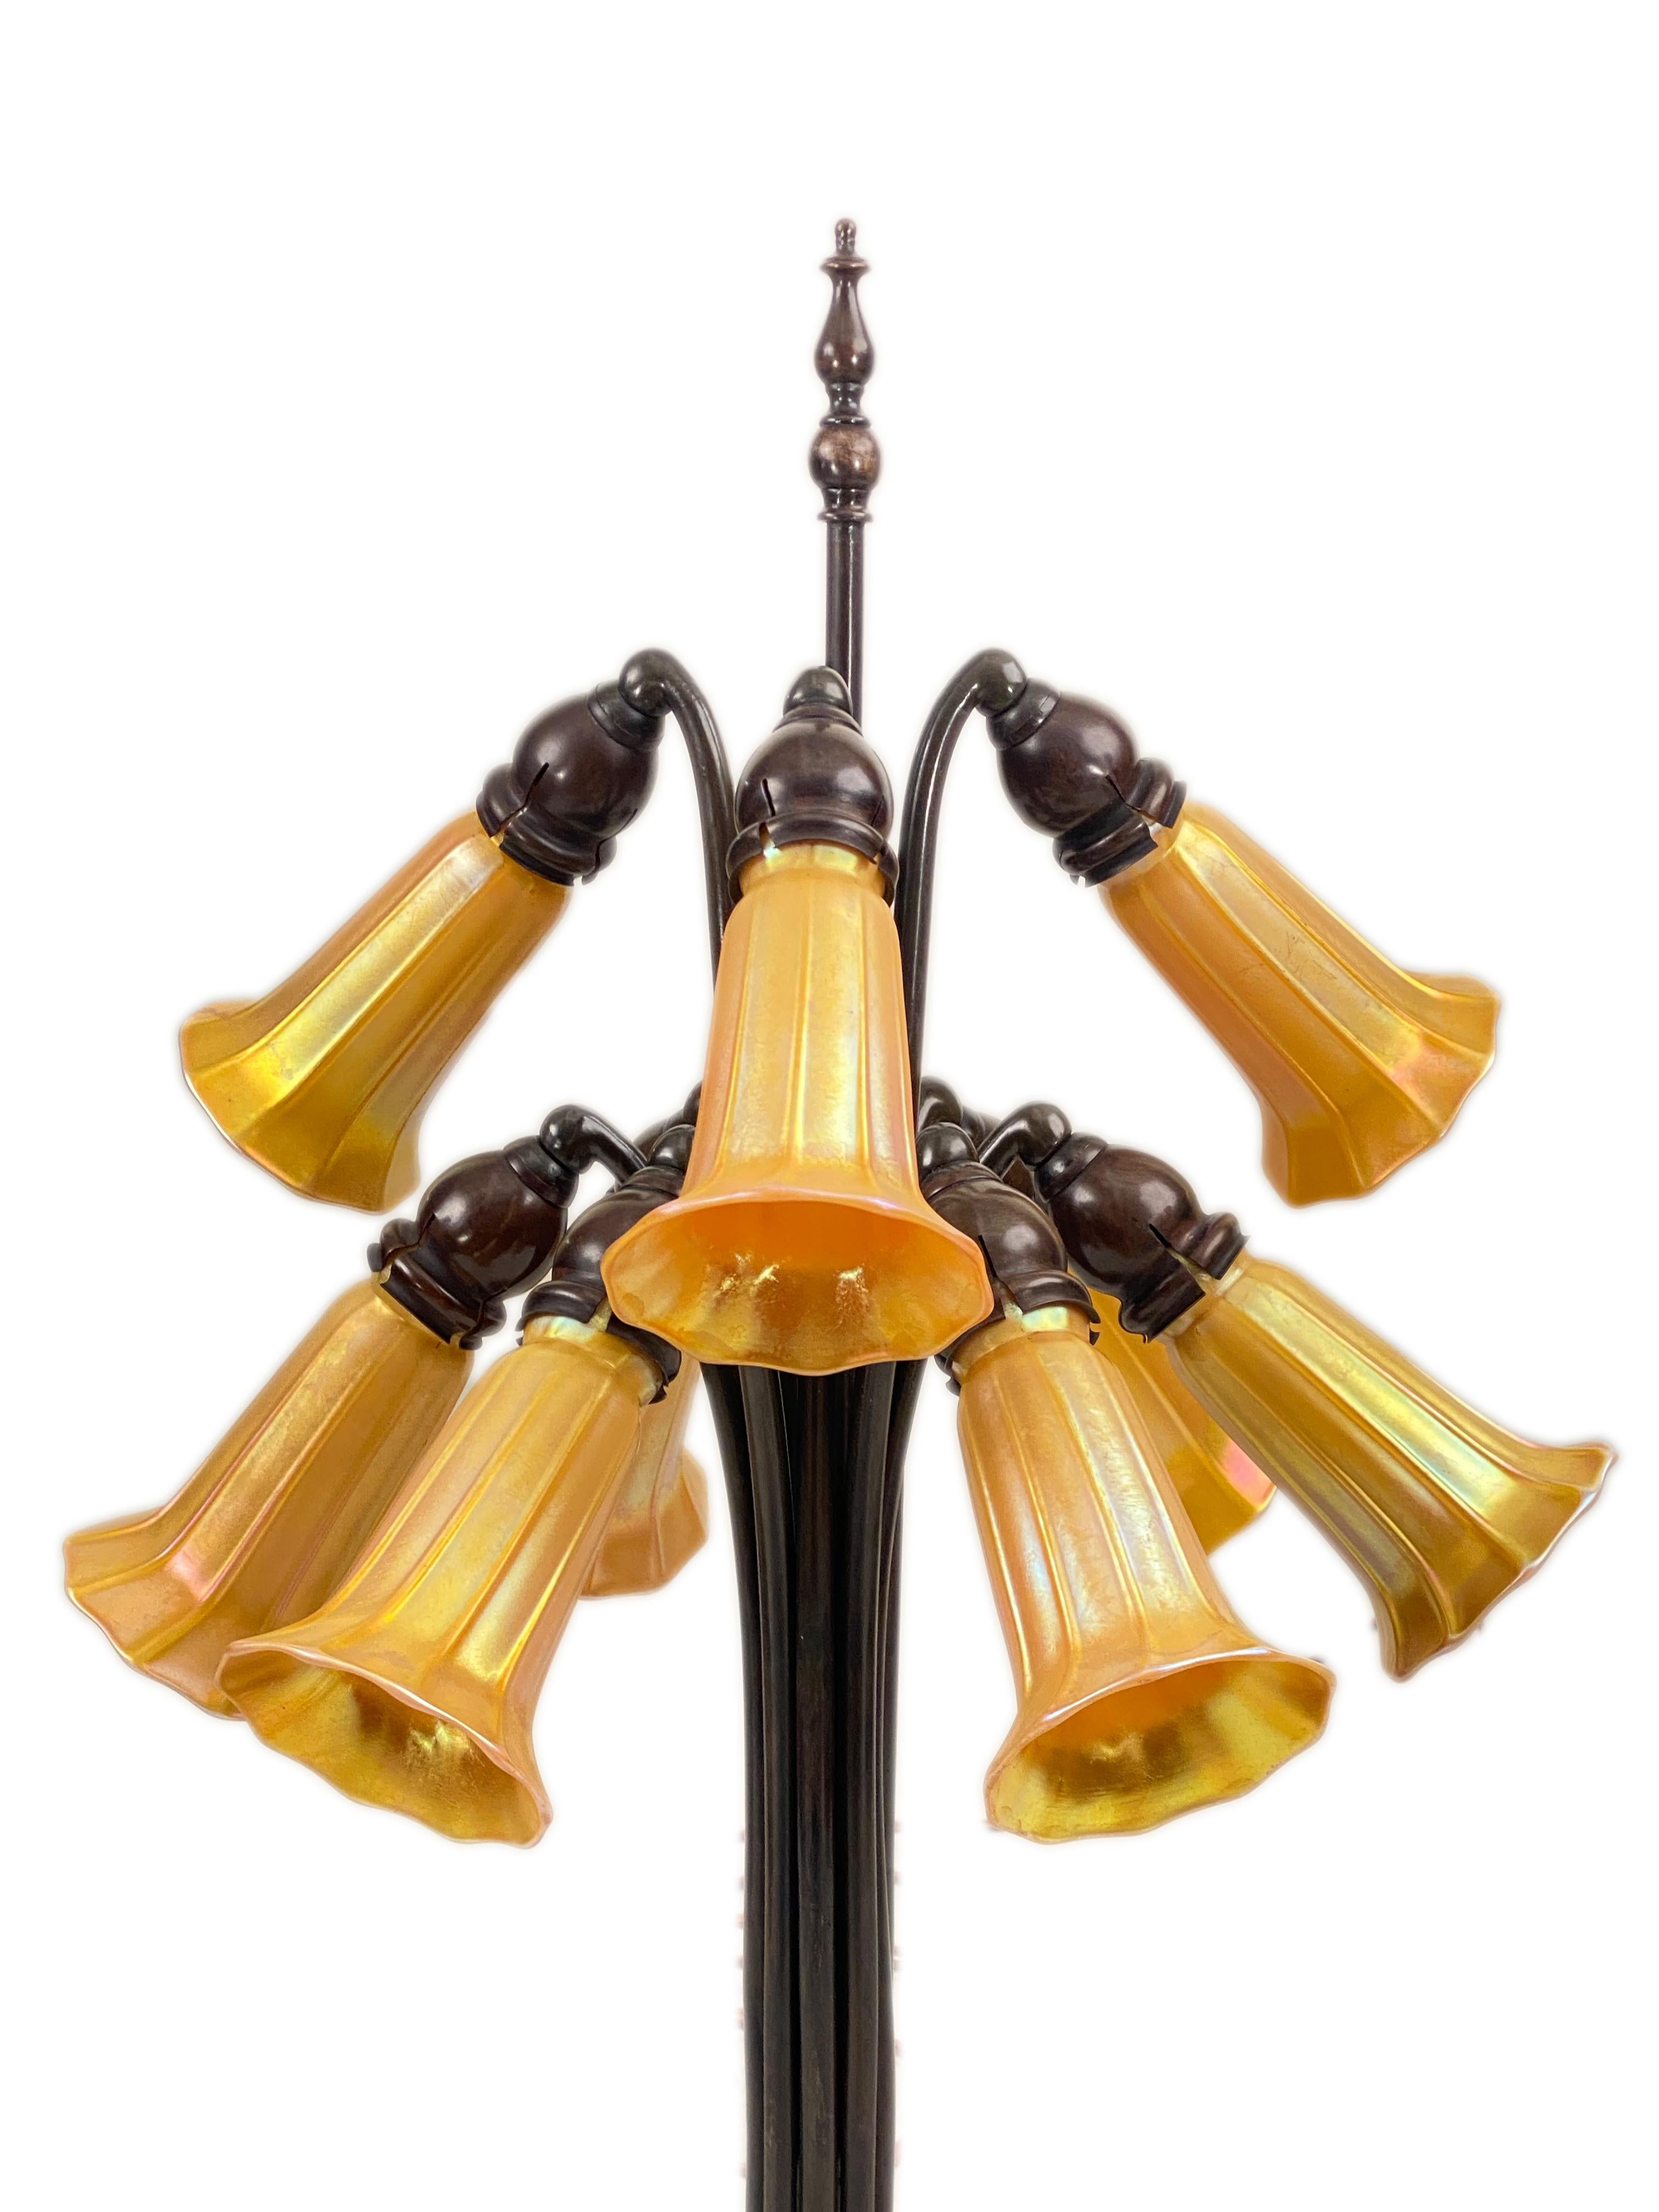 North American American Art Nouveau Lily Table Lamp by, Quezal Glass & Decorating Company